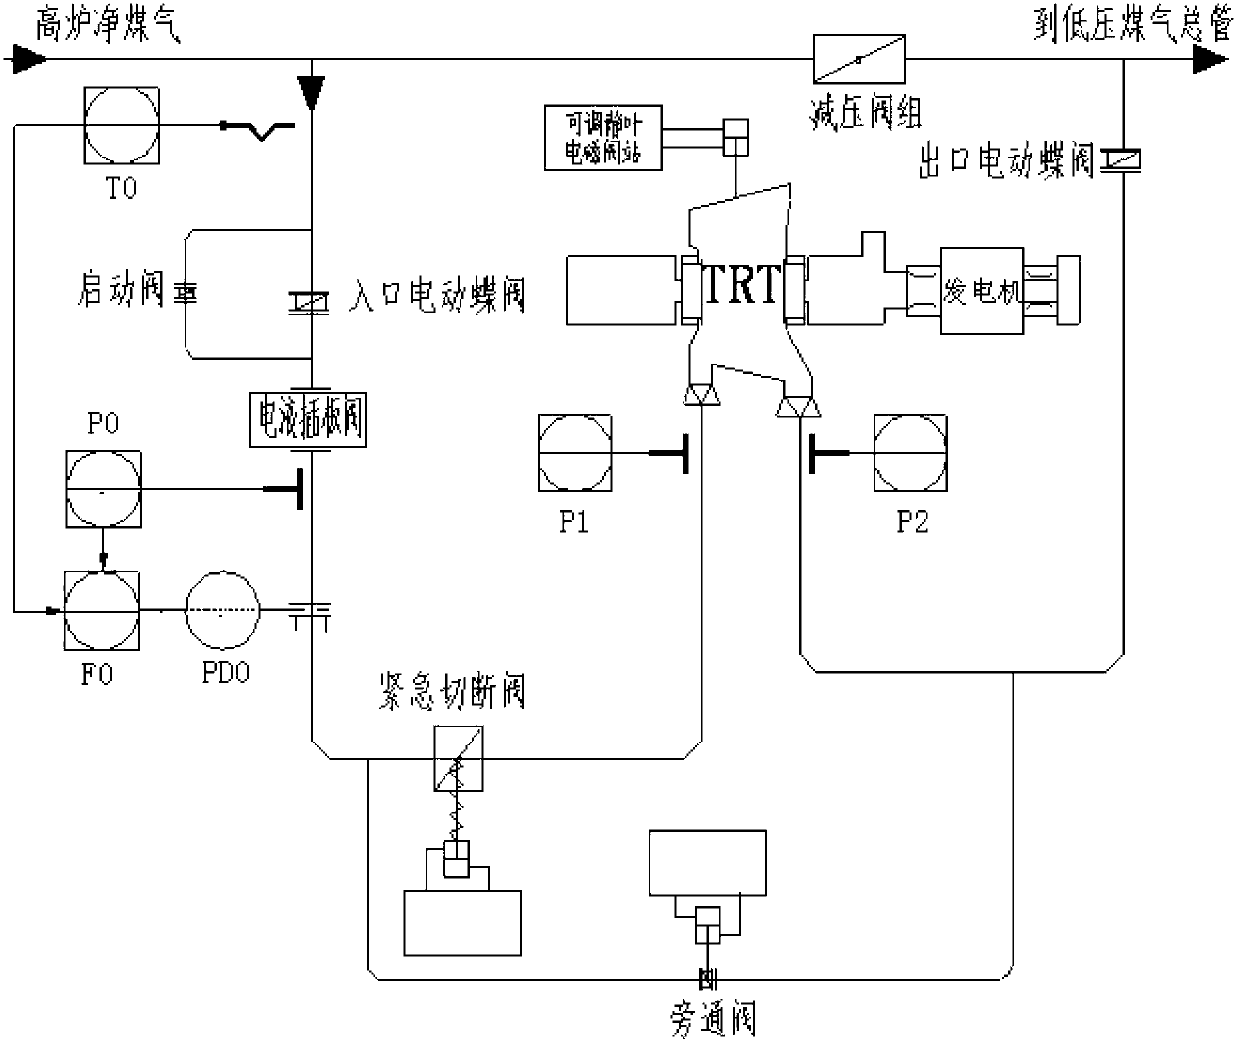 Automatic control method for top pressure of TRT (blast furnace top gas recovery turbine unit) system